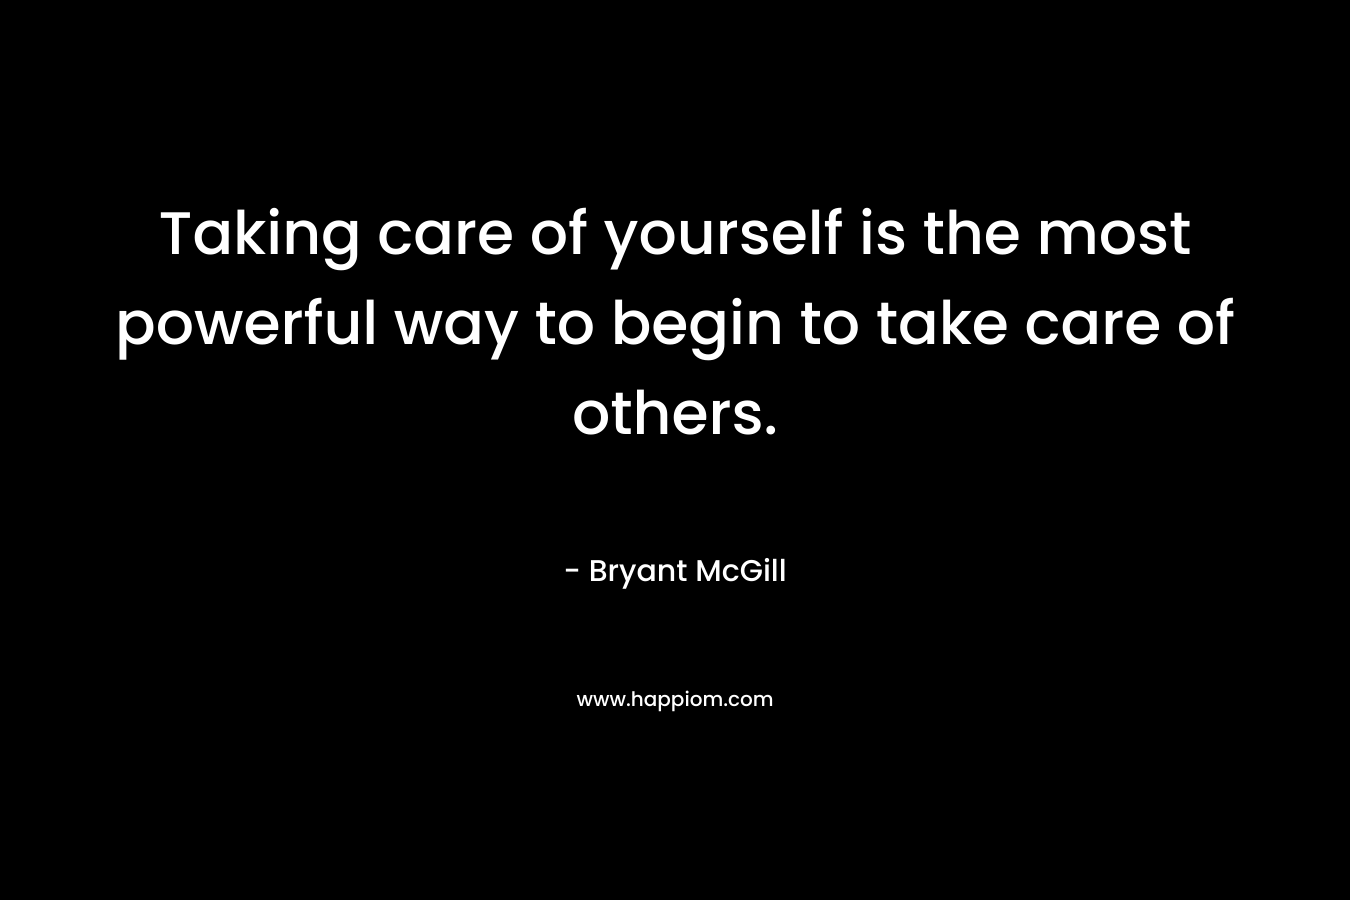 Taking care of yourself is the most powerful way to begin to take care of others.